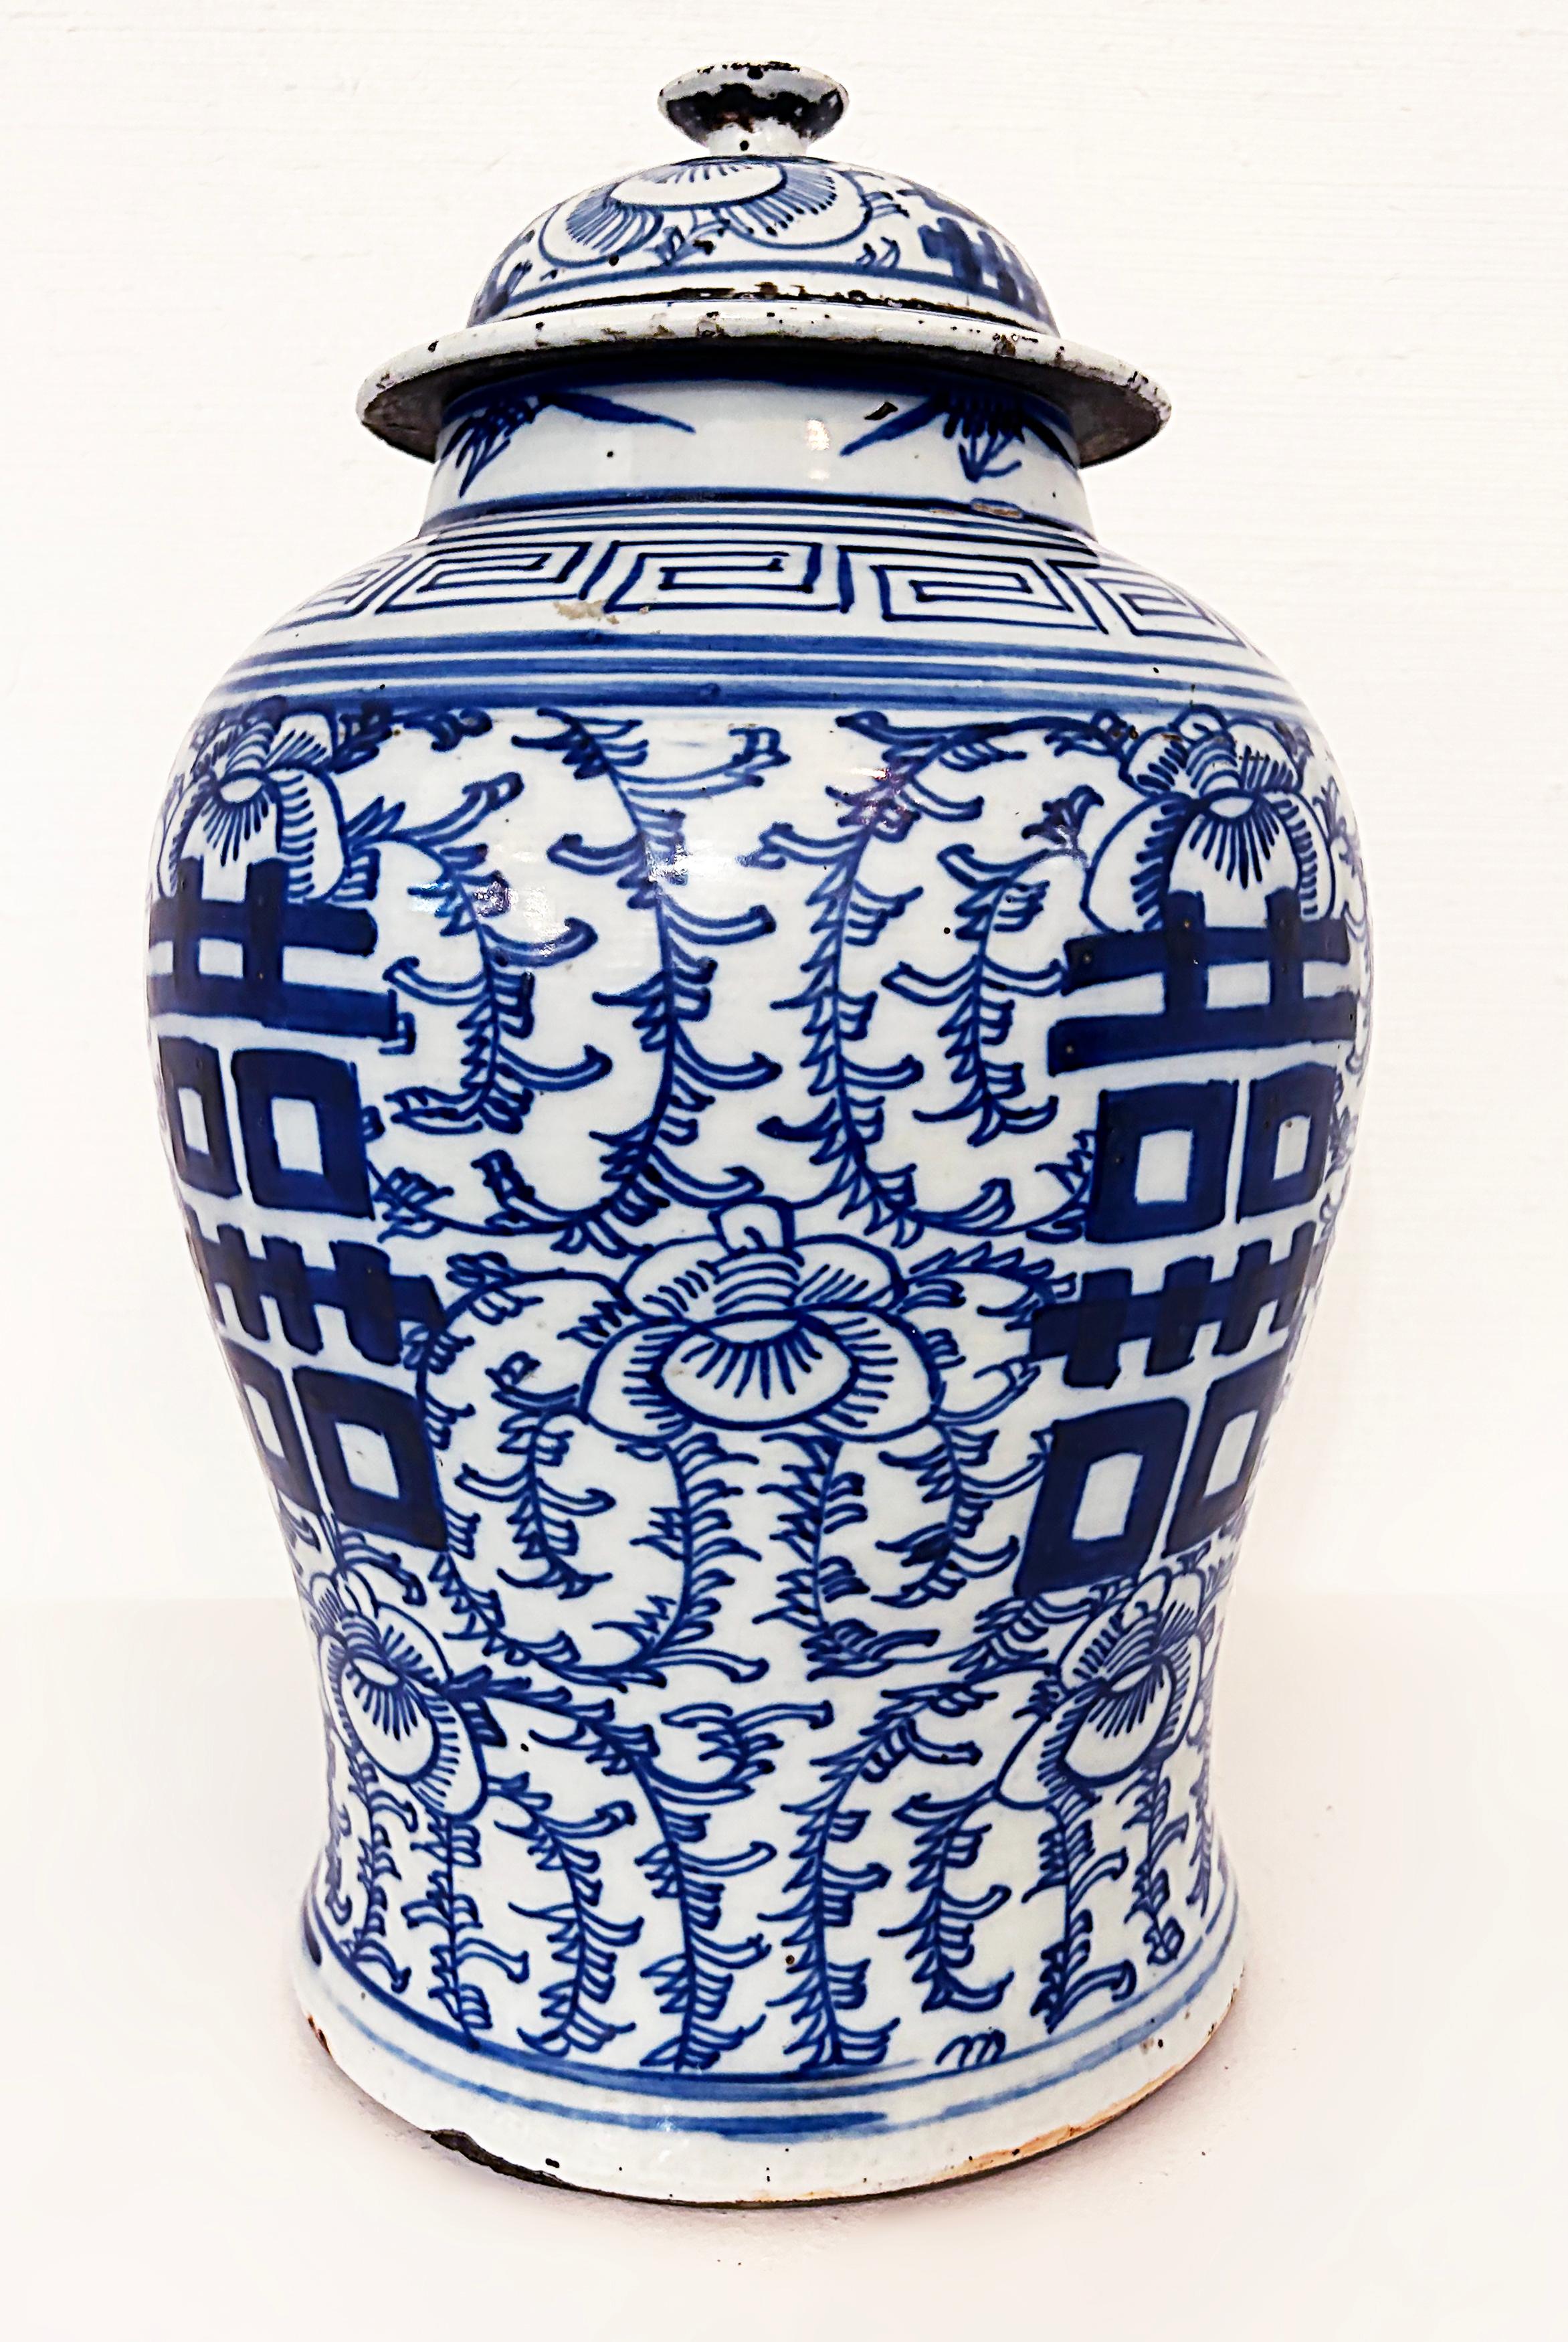 20th Century Chinese Blue and White Porcelain Covered Ginger Jar on Stand